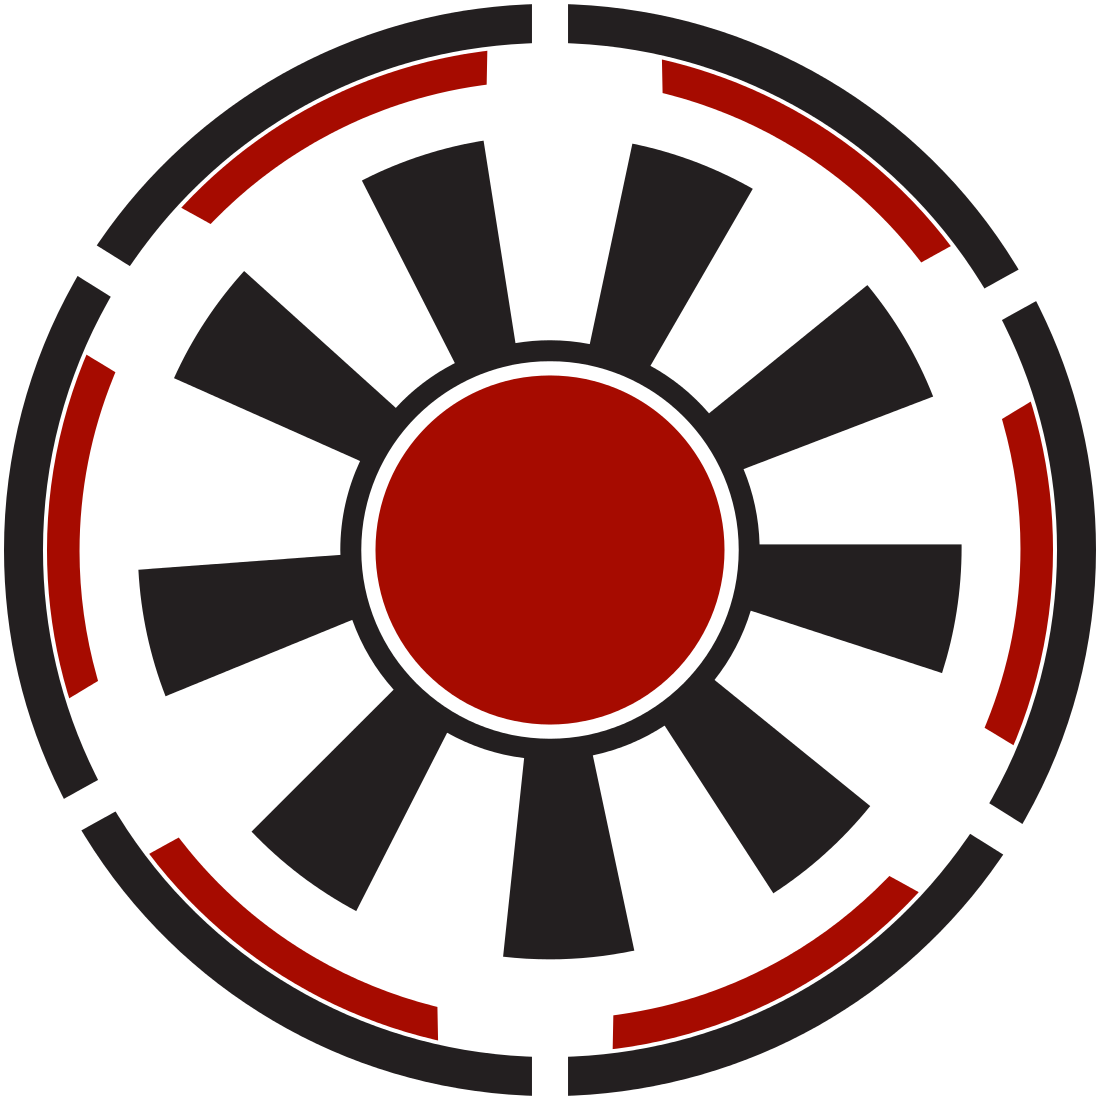 The Rise Of The New Empire - Imperial Intelligence Symbol (1100x1100)